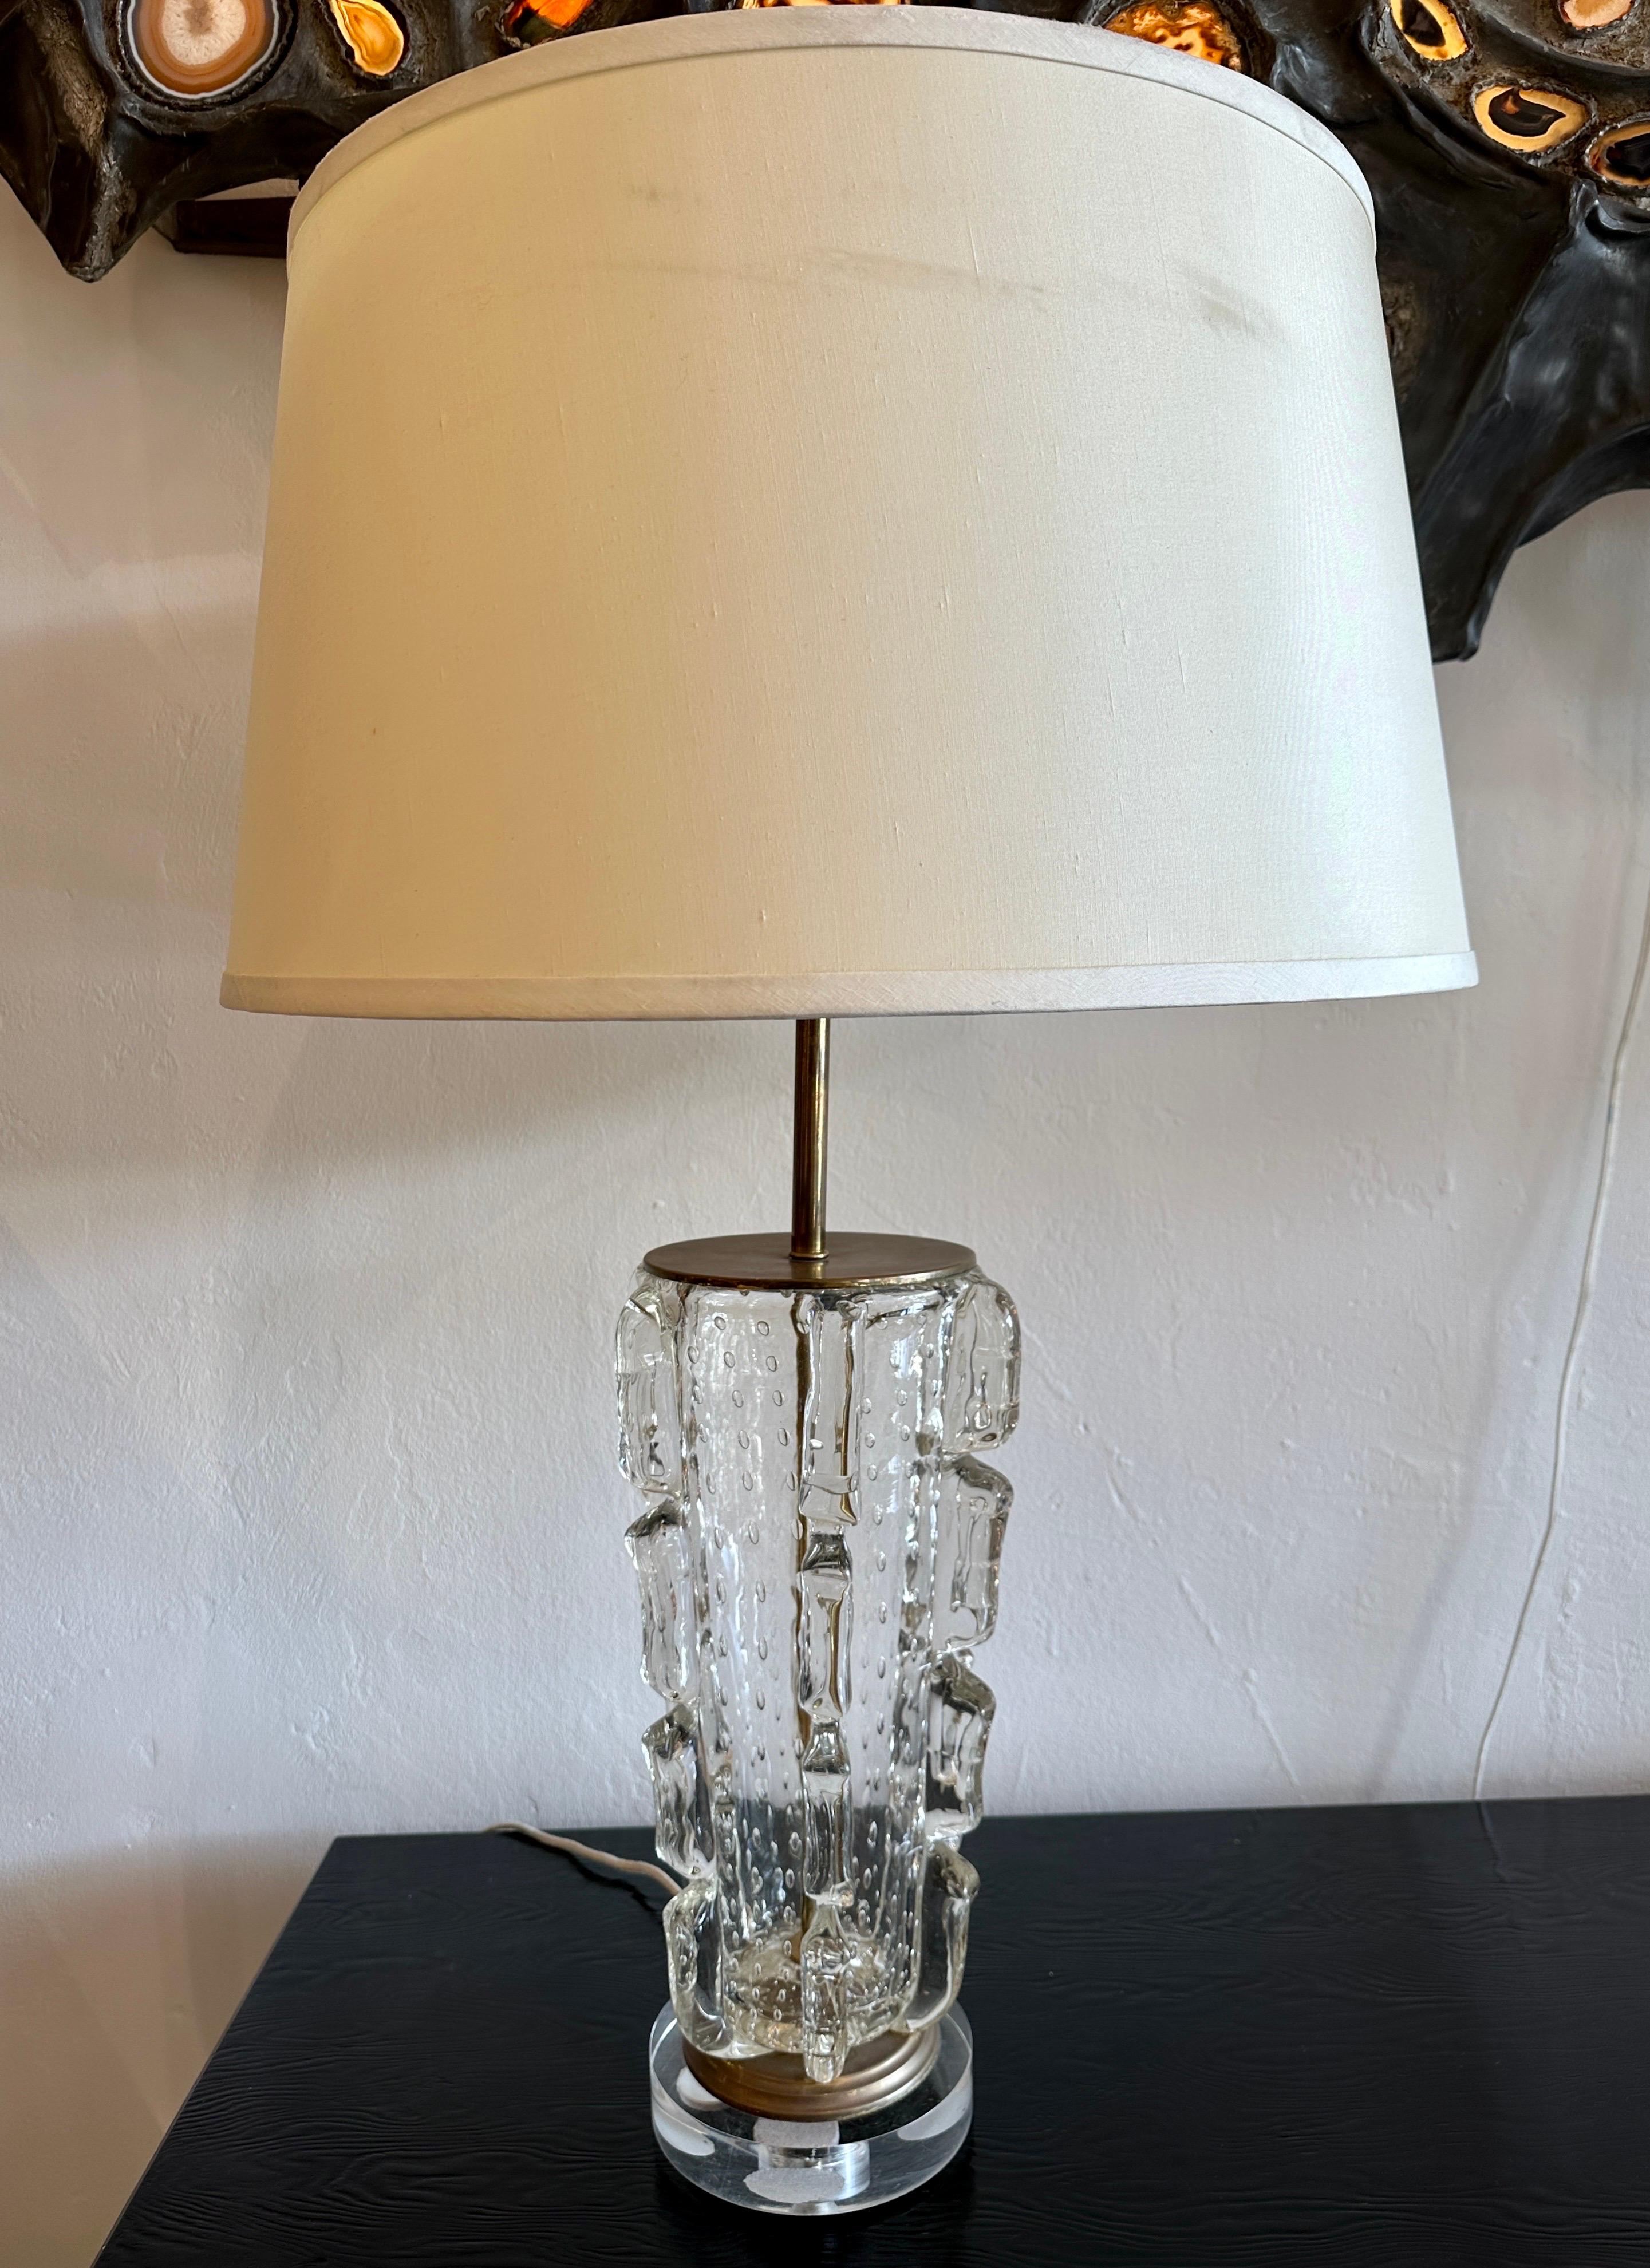 Vintage 1940's Barovier Bubbled Murano Glass Table Lamp For Sale 1